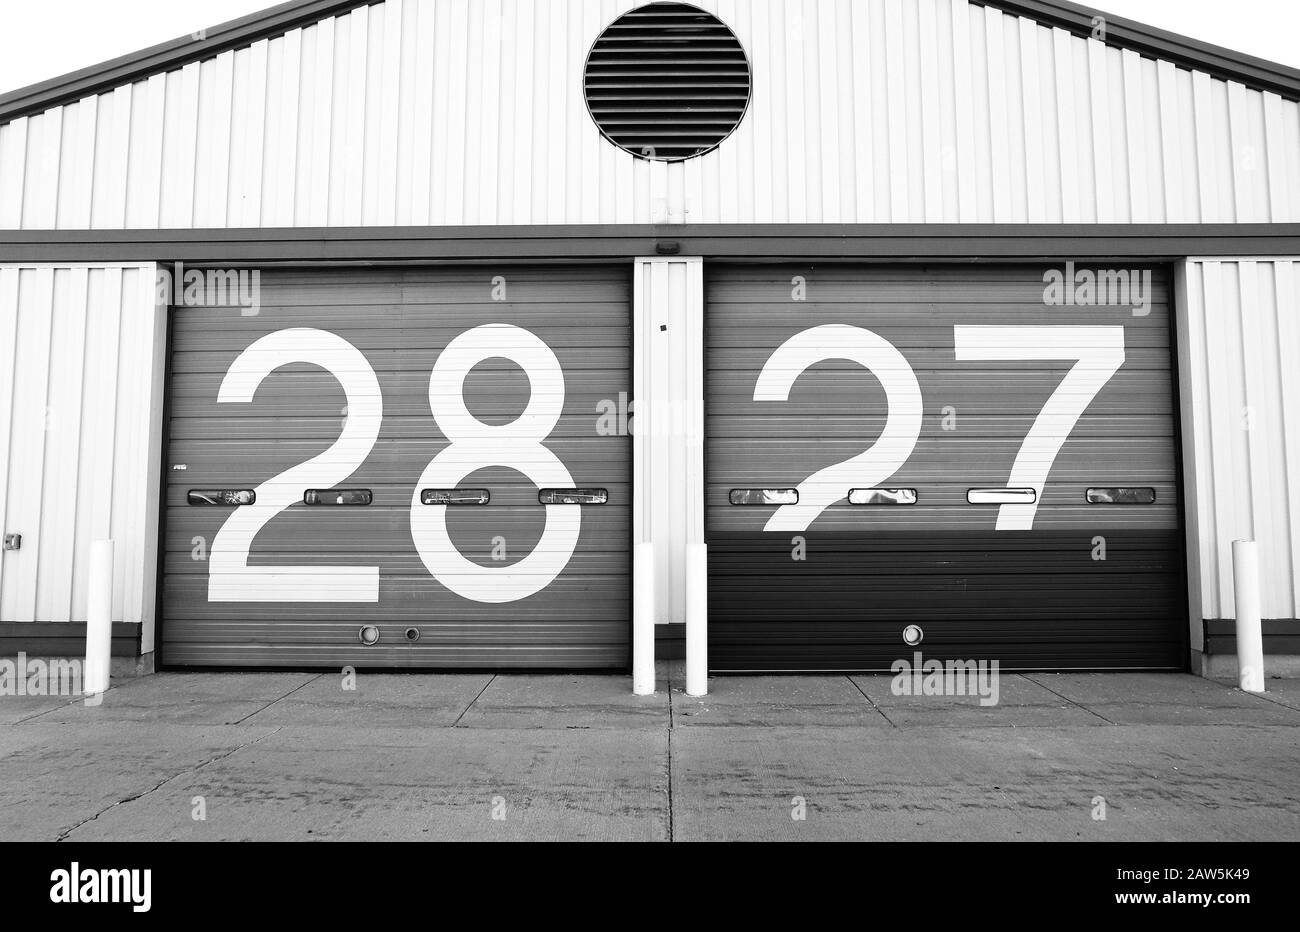 bus-garage-doors-with-the-numbers-28-and-27-on-the-doors-2AW5K49.jpg